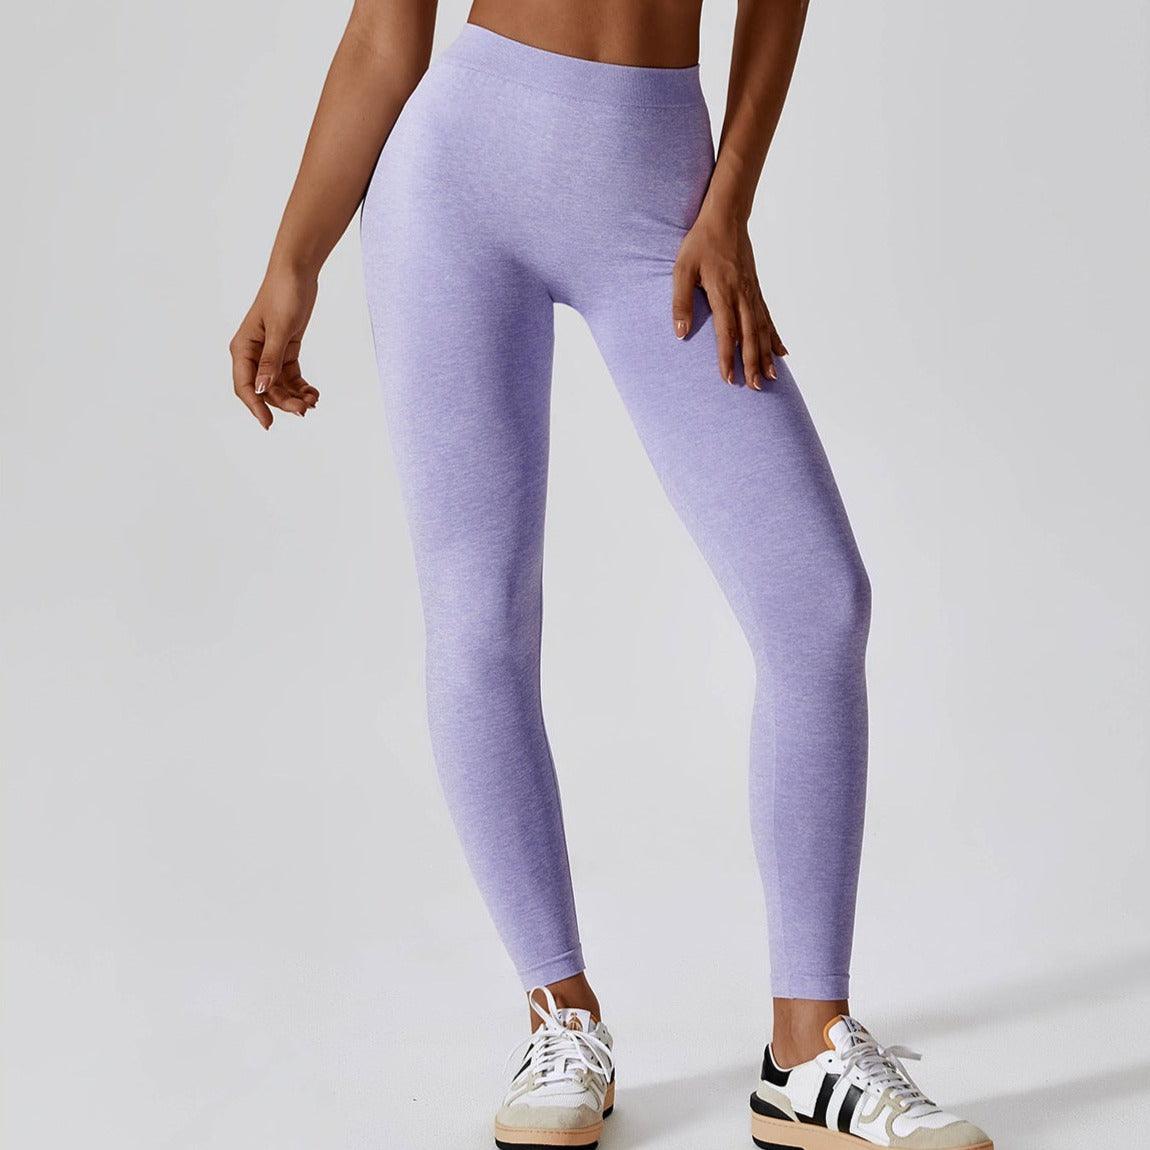 No front seam leggings 🔥🔥🔥 These are compressive, soft, and stretchy!  Hold you in and they have the v stitching which makes the